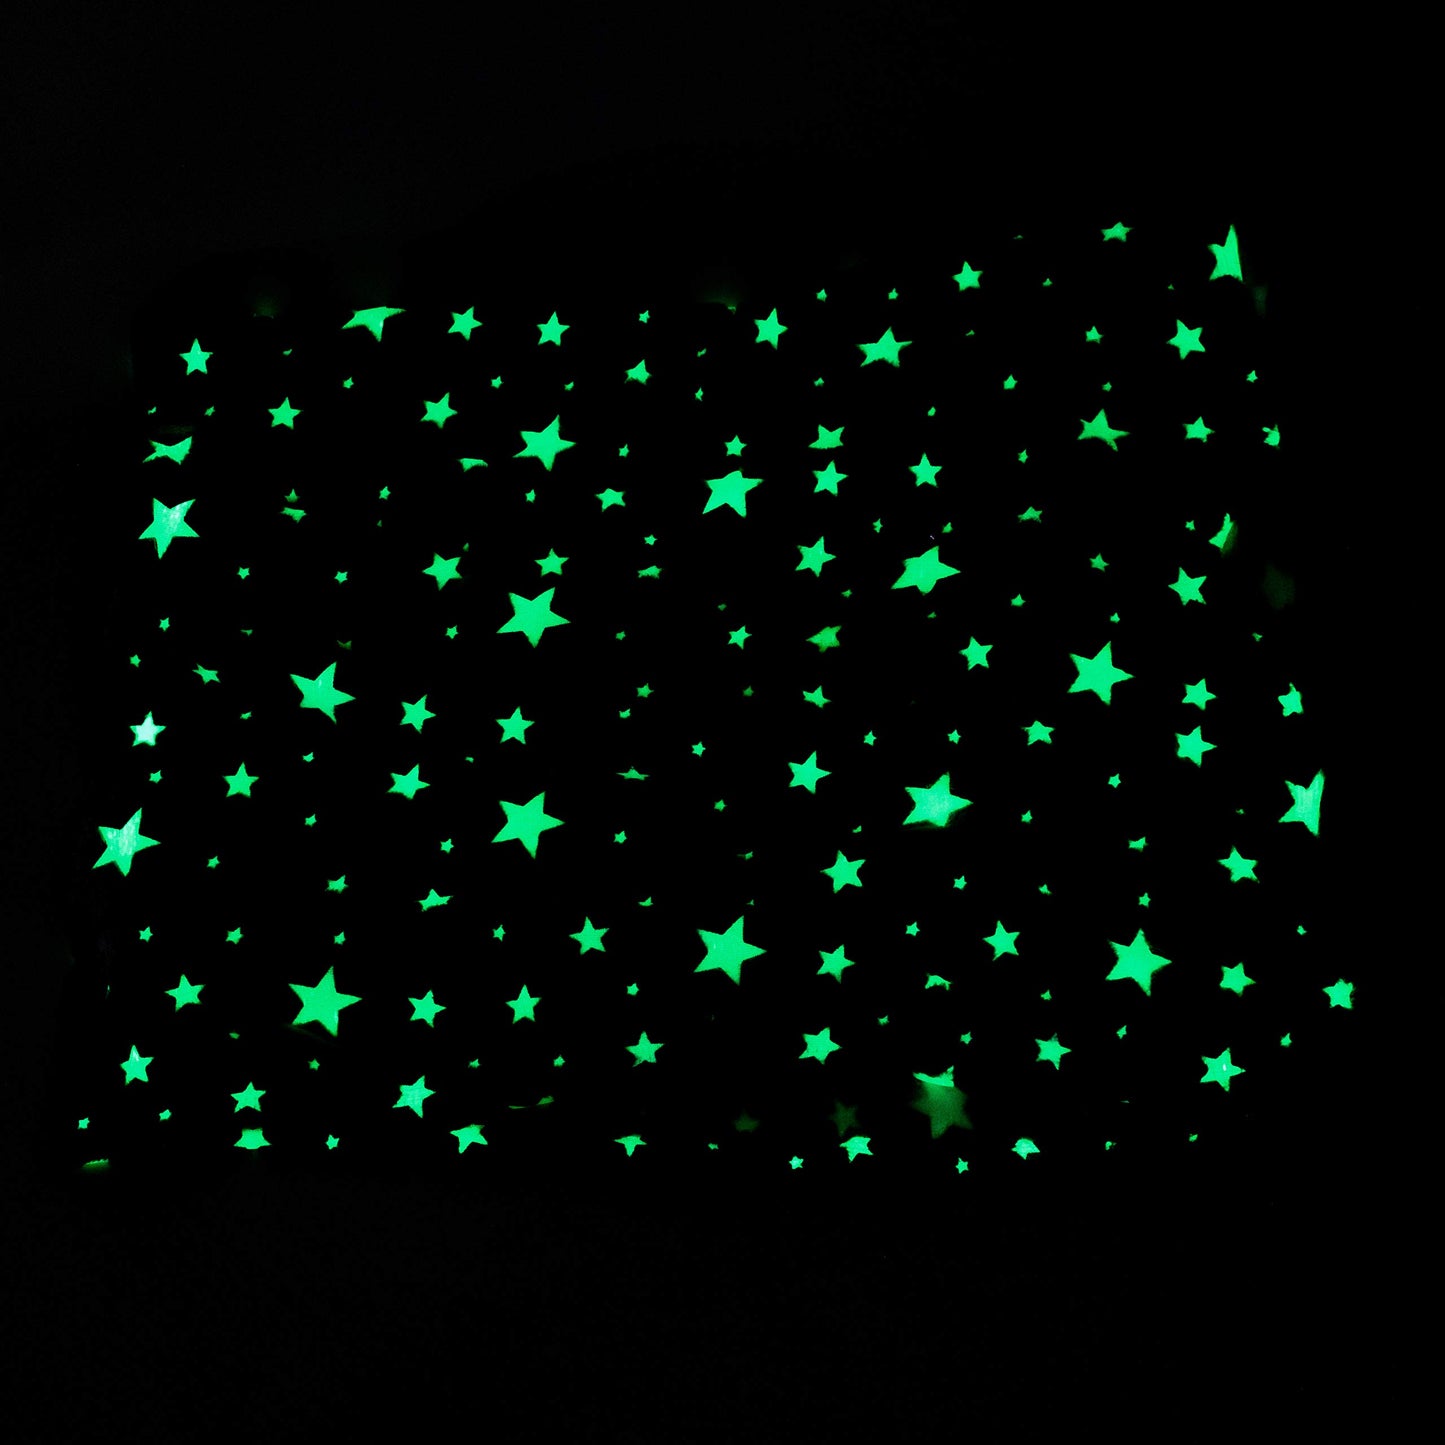 ModernMade Glow in The Dark Blanket | Super Soft Cozy Galaxy Blanket for Kids & Adults | 50" x 60" | Night Sky Blue